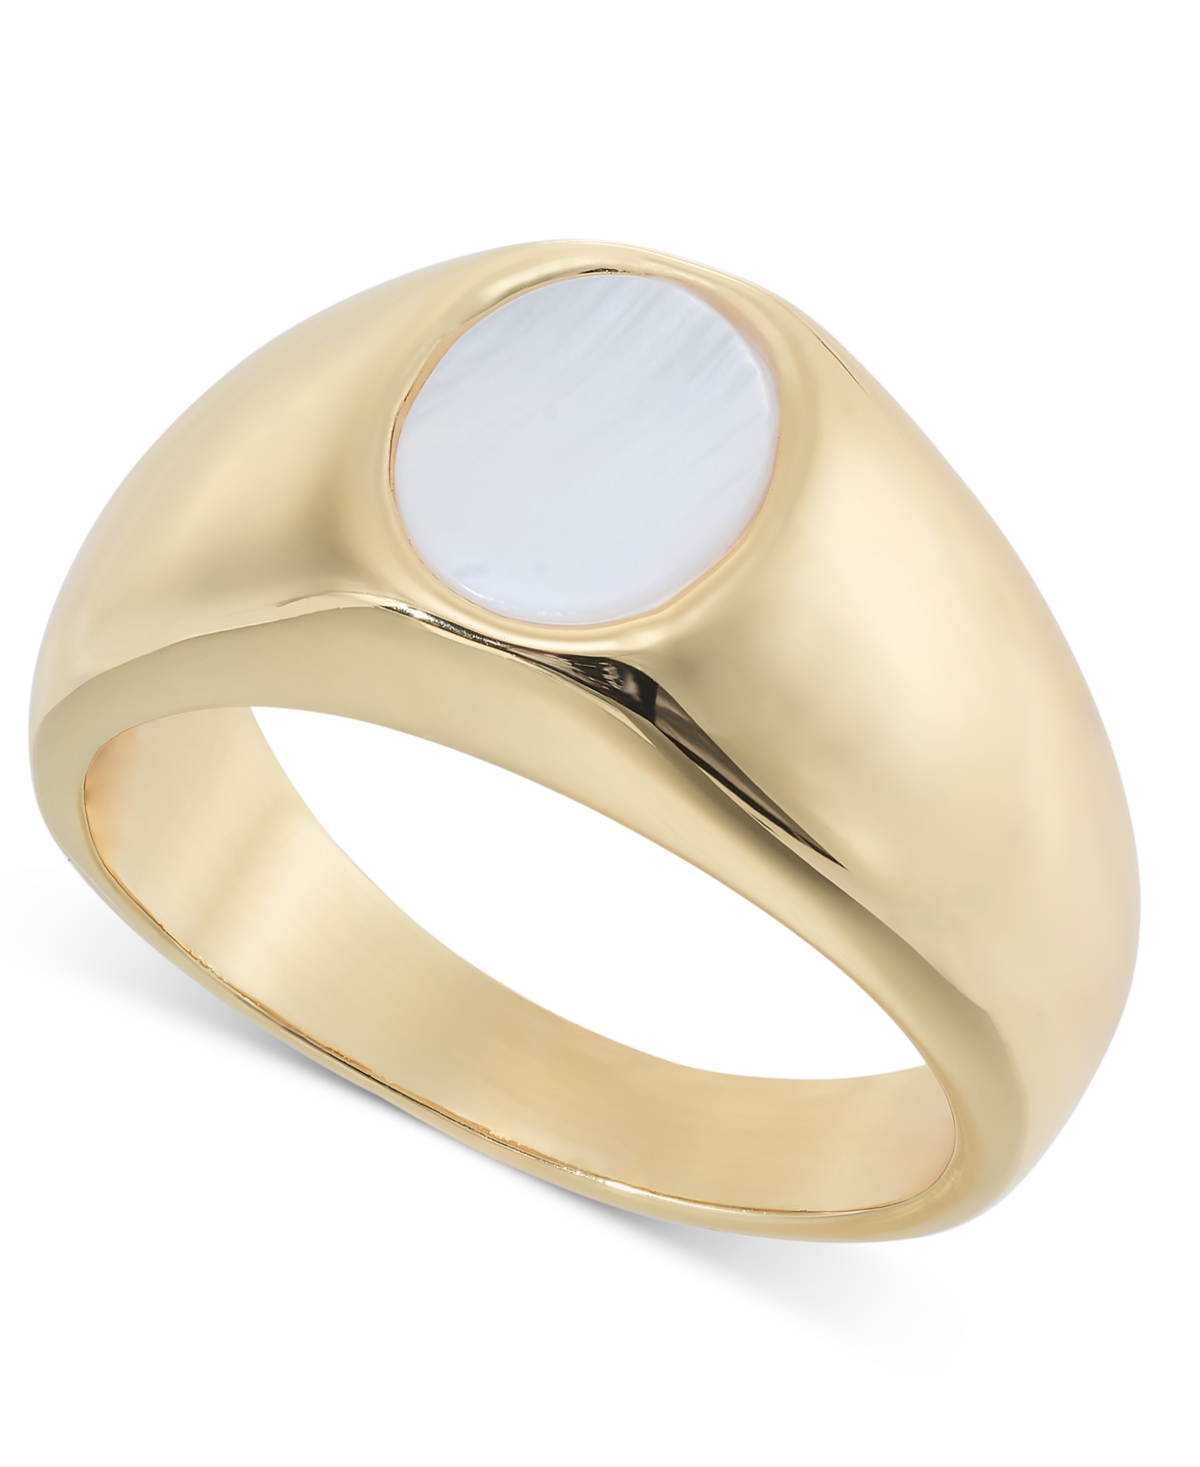 Gold-Tone Mother-of-Pearl Signet Ring, Created for Macy's - Gold